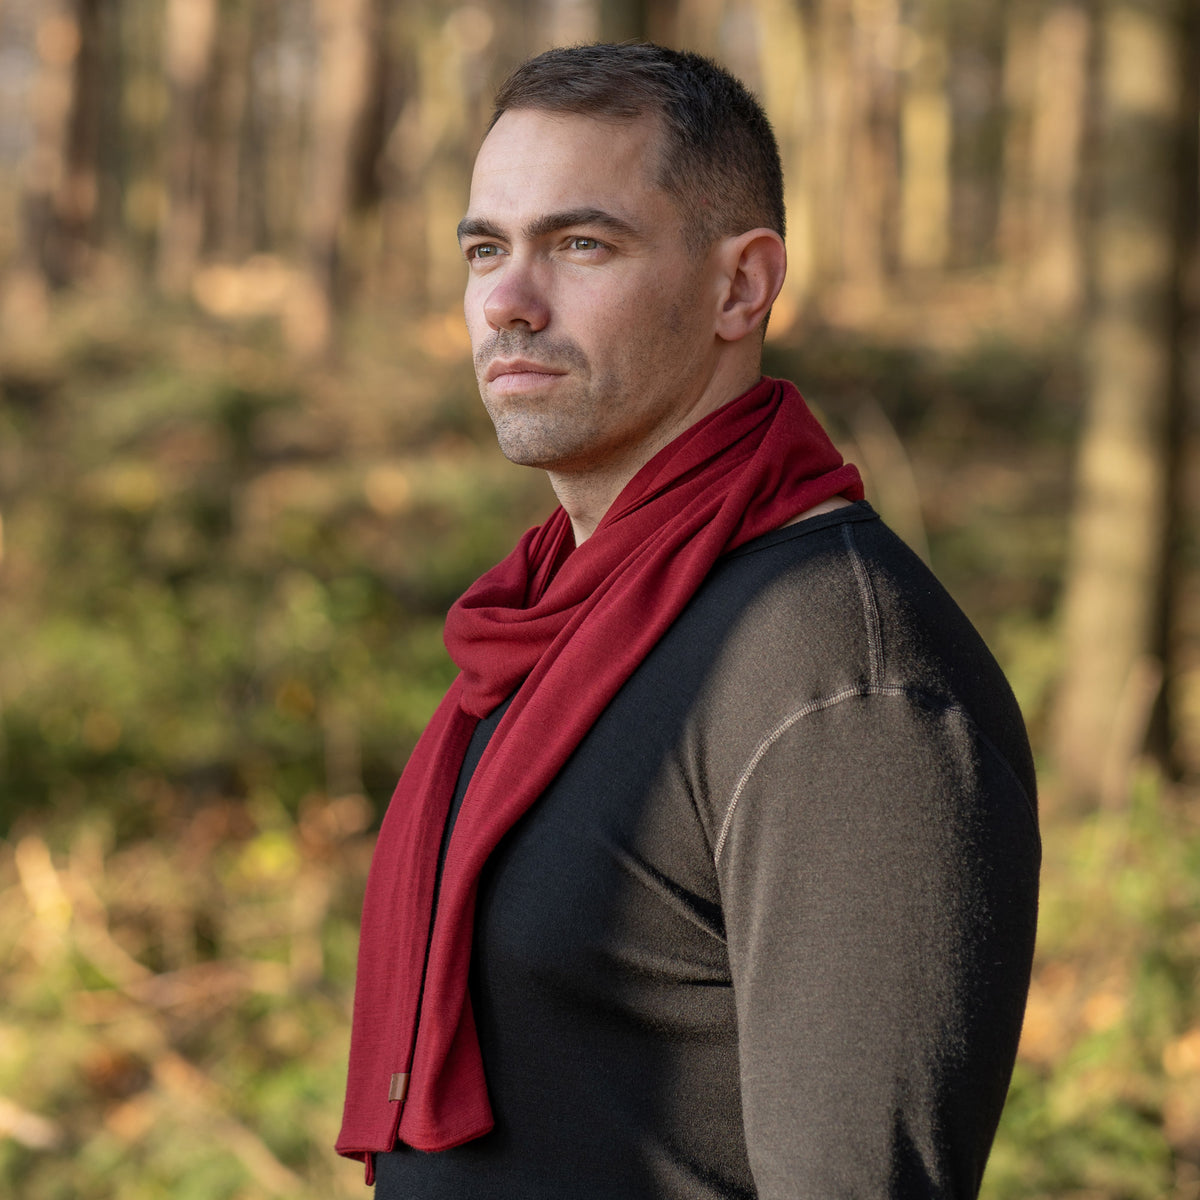 Simple and elegant gifts for men - scarves in pure wool